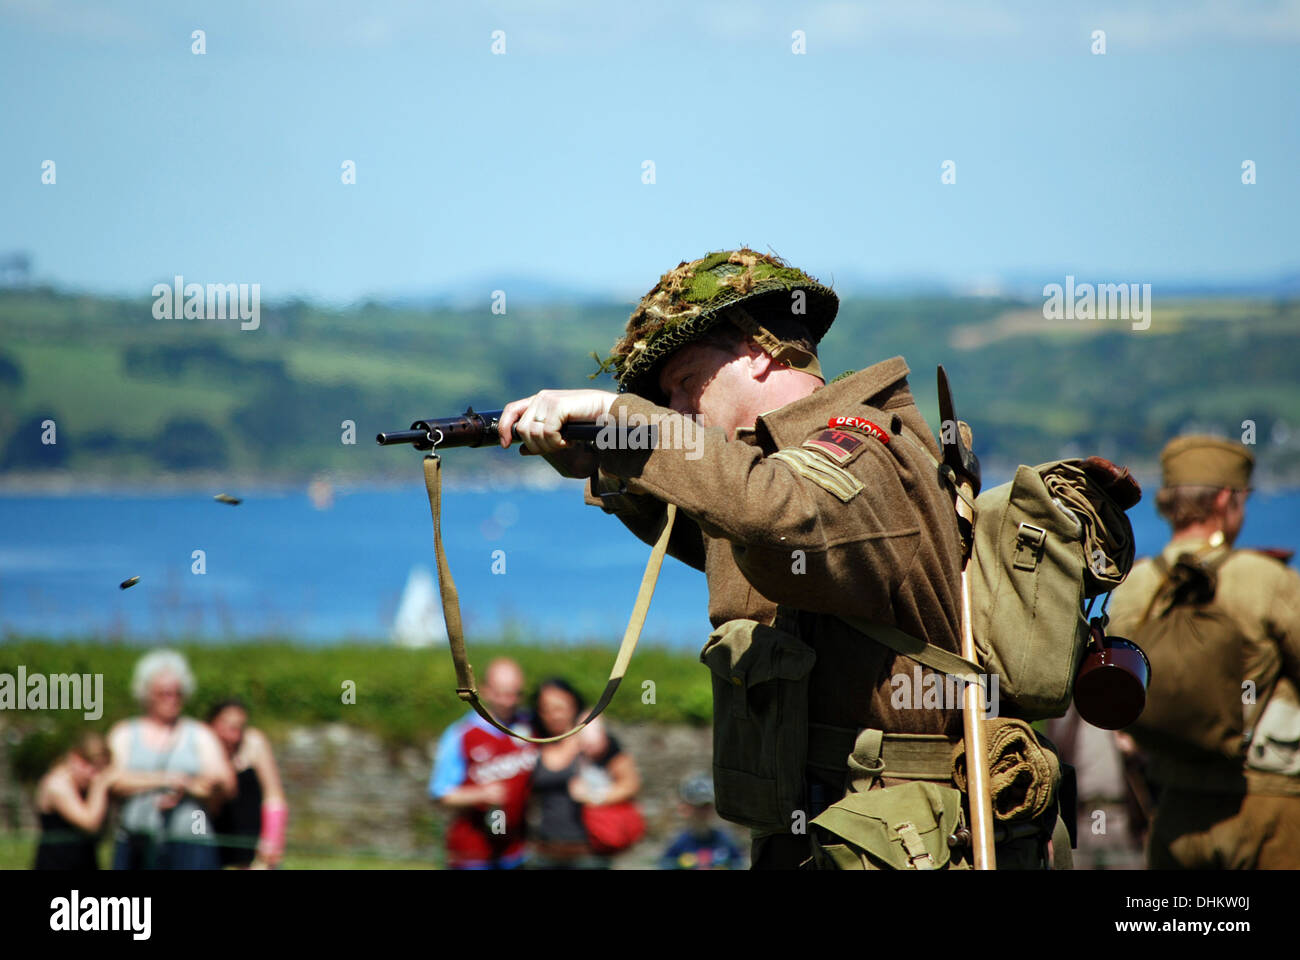 bullets emerging from gun, fired by a world war two british soldier at re-enactment event Stock Photo